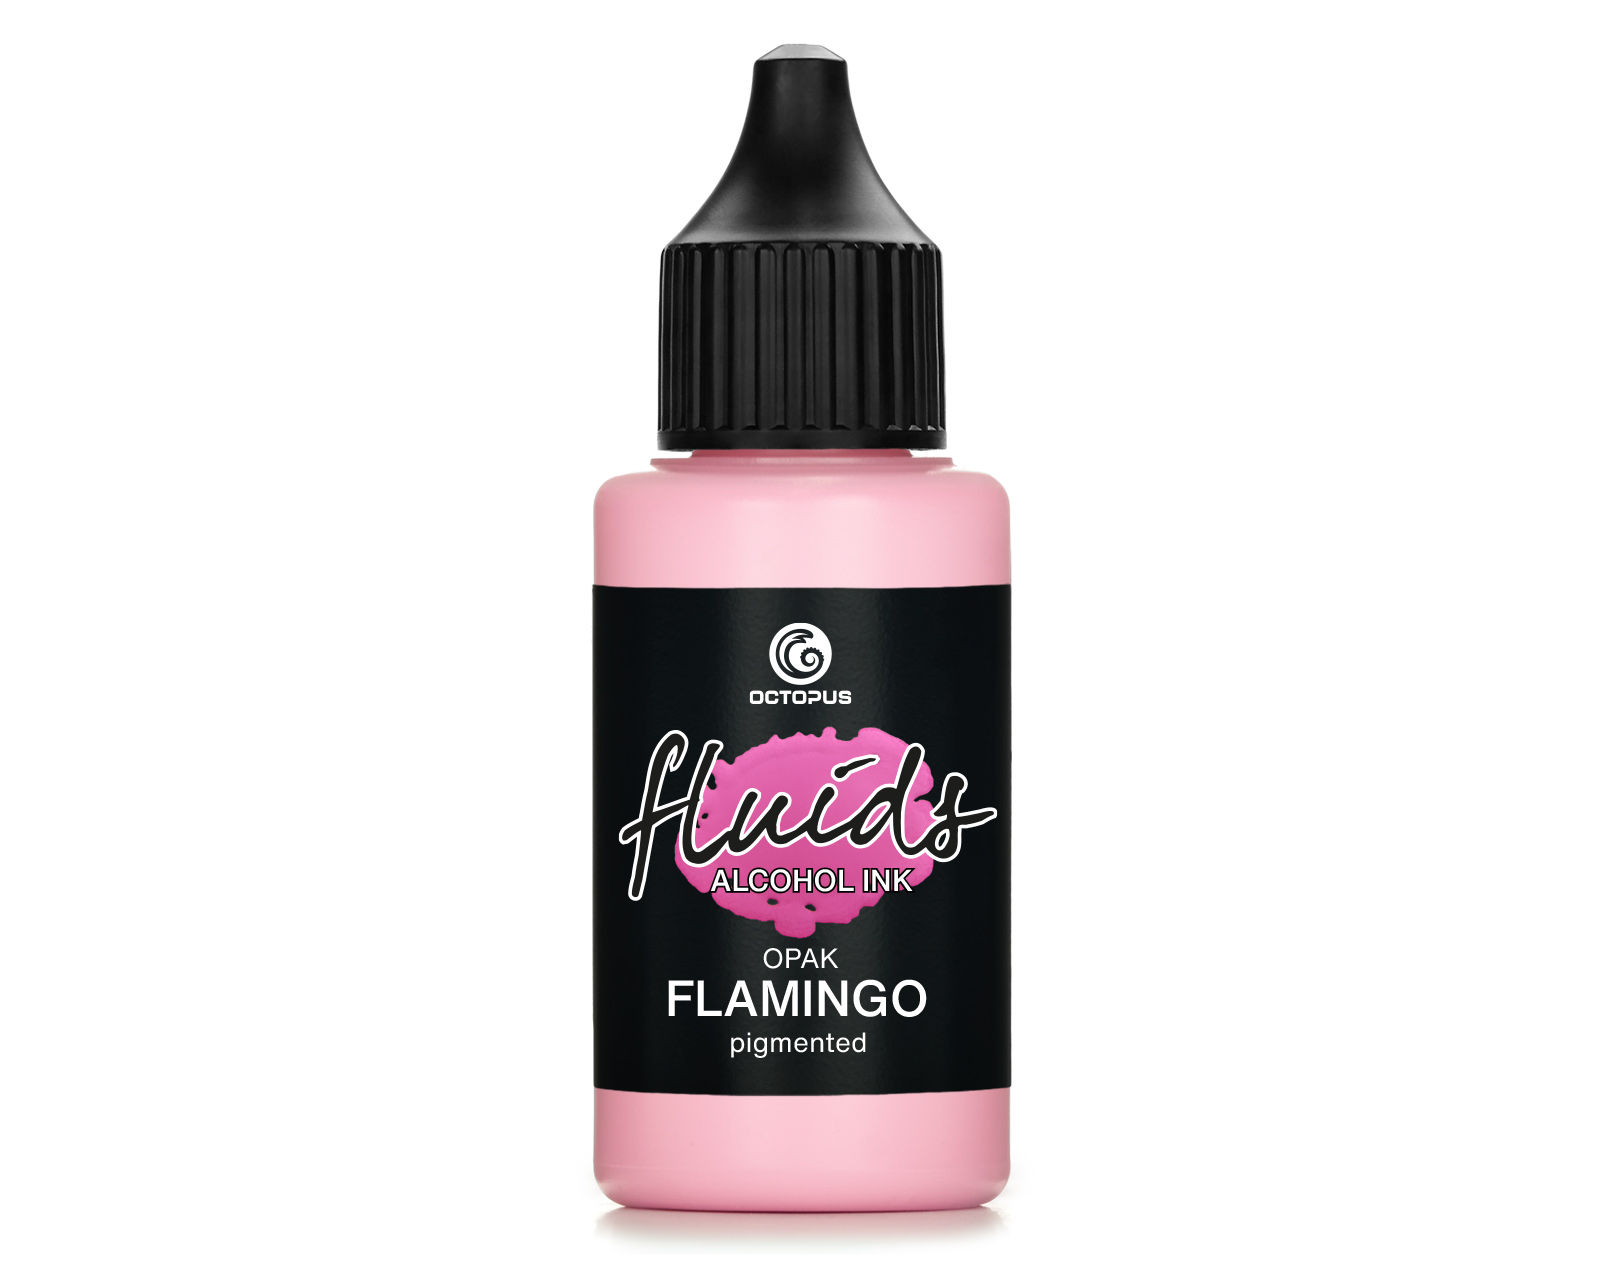 Fluids Alcohol Ink OPAK FLAMINGO for fluid art and resin, pastell pink